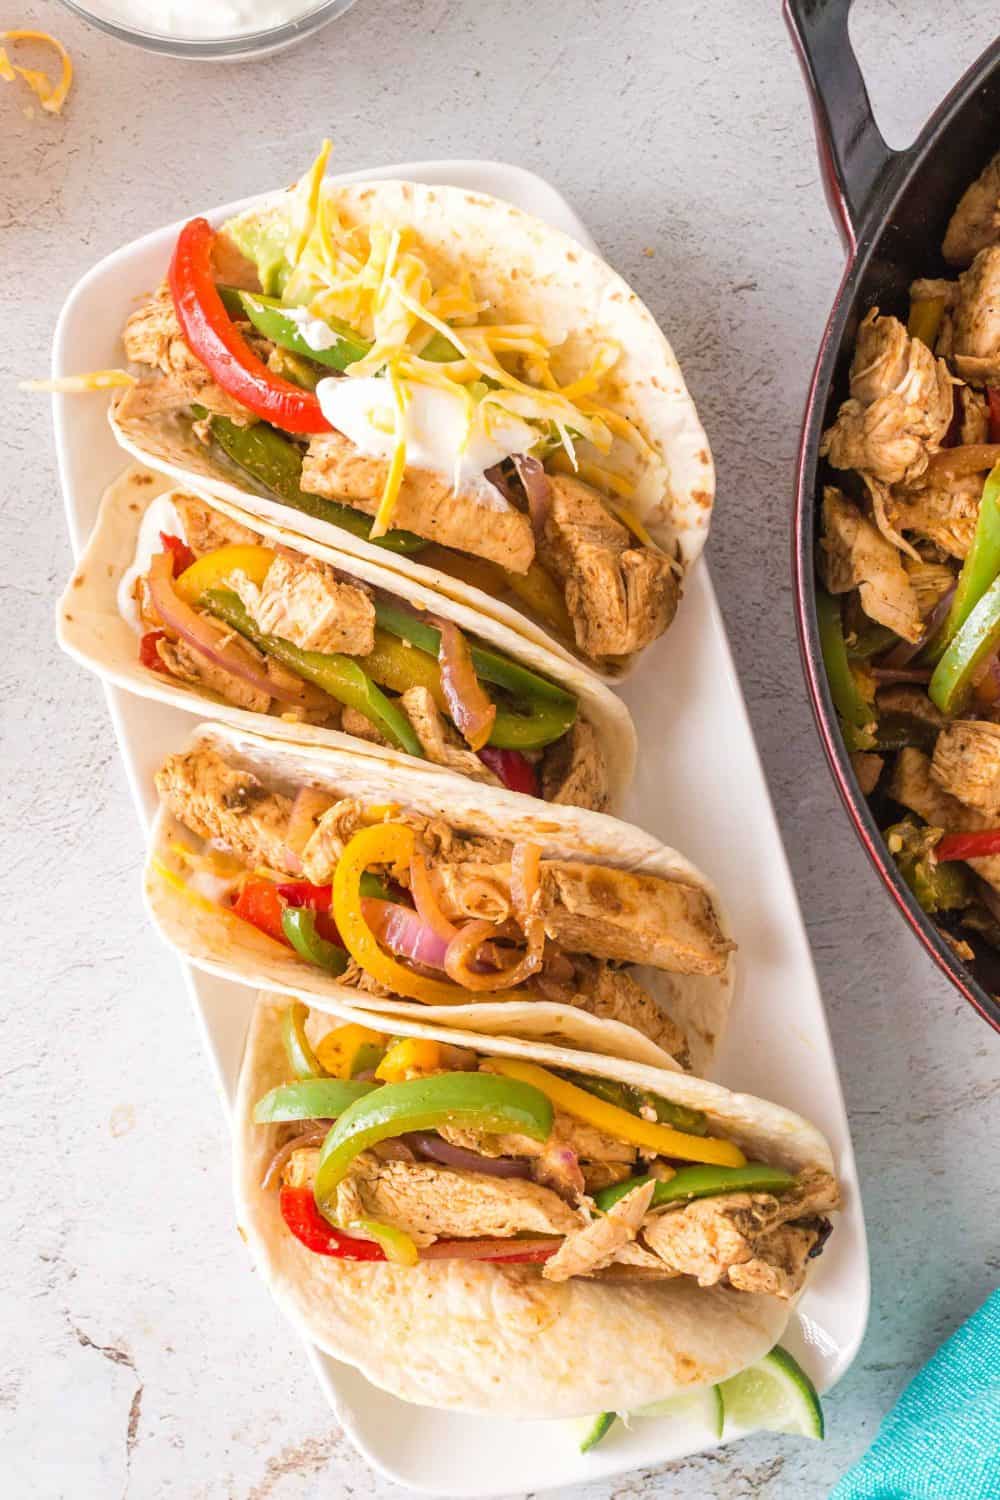 4 chicken fajitas with peppers and onions in a flour tortilla.